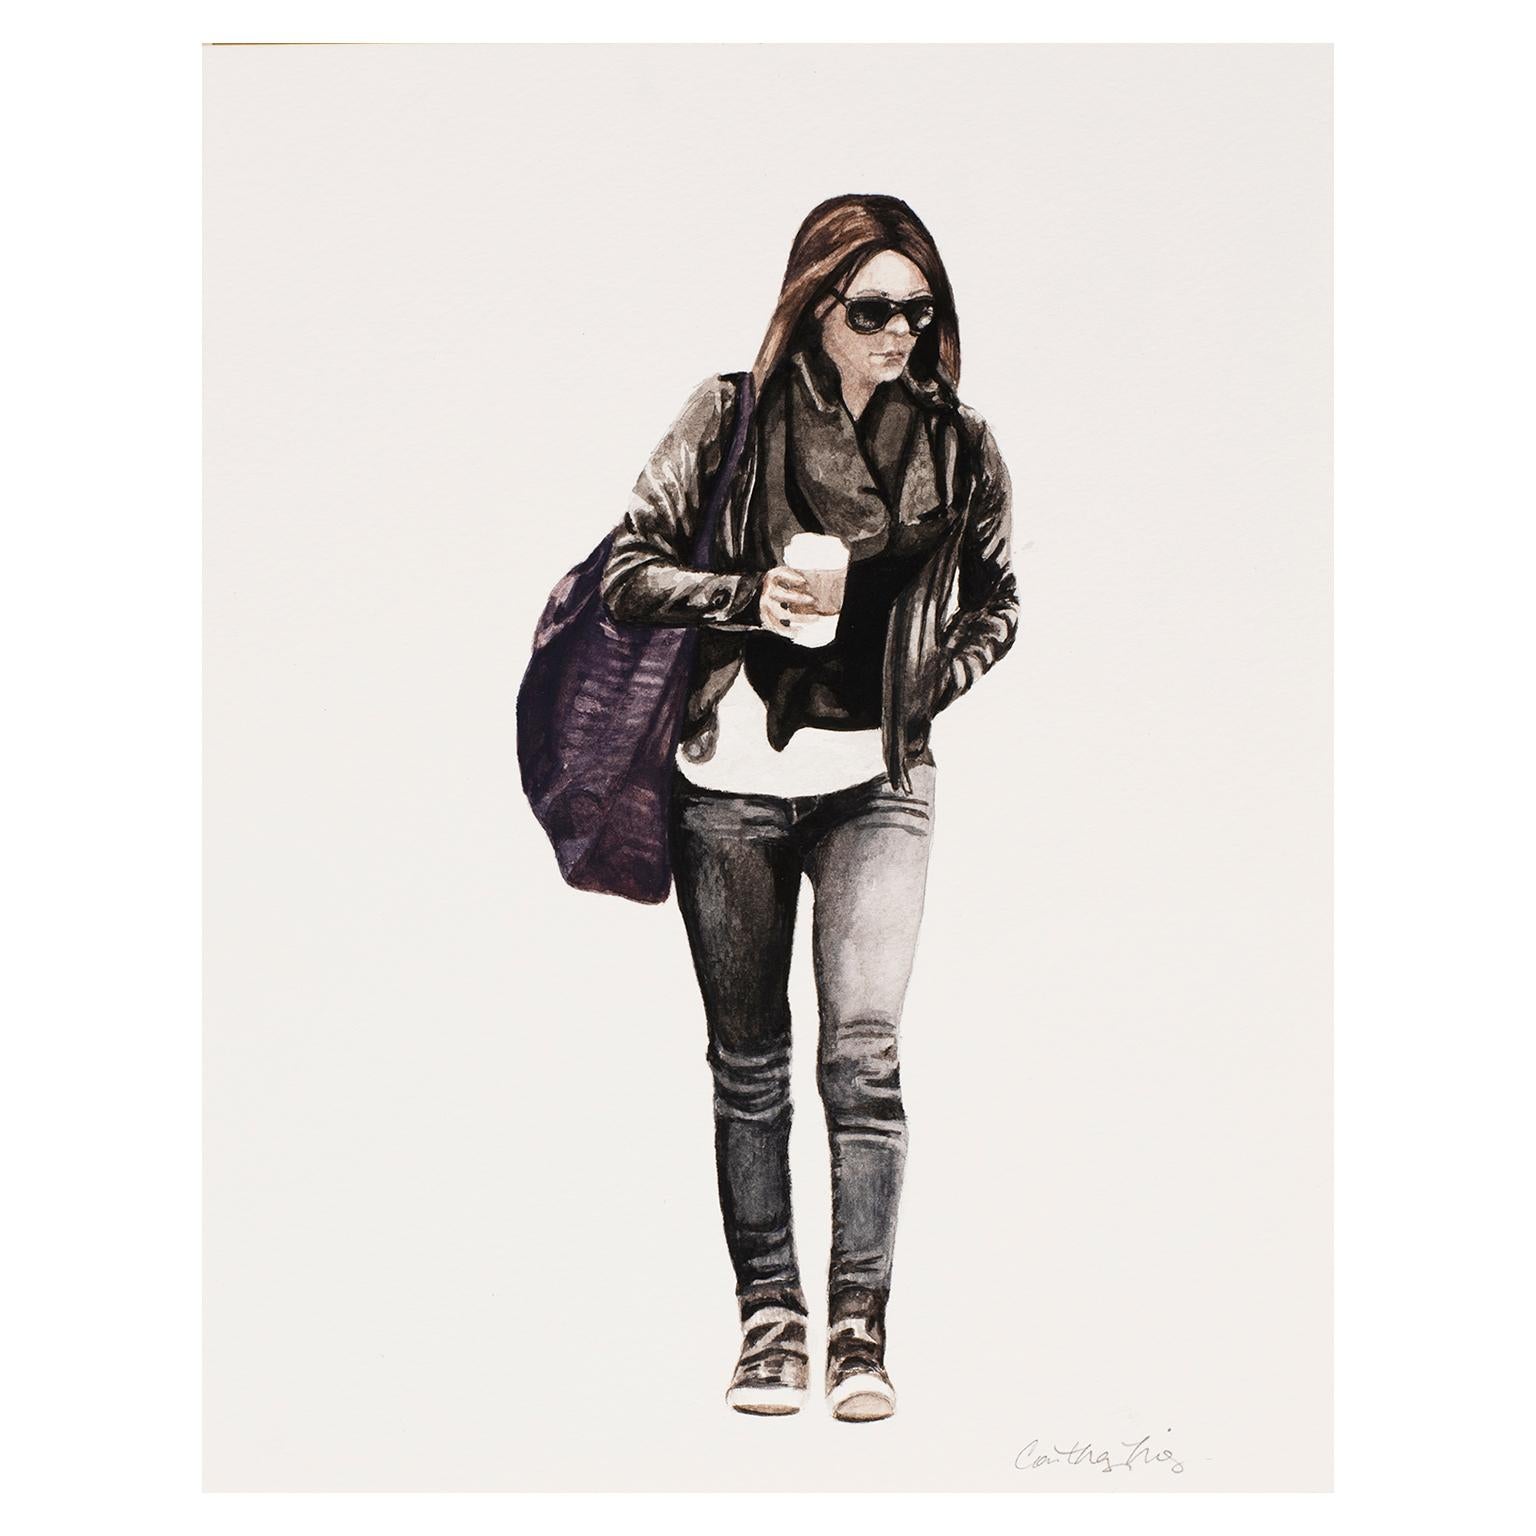 Courtney Incognito 029 by Courtney Miles, 2008. 
Original gouache and graphite on paper. 
11 x 8 inches Unframed
Brunette with black jacket, black purse and blue jeans

Courtney Miles originally did 100 works for the Courtney Incognito series in